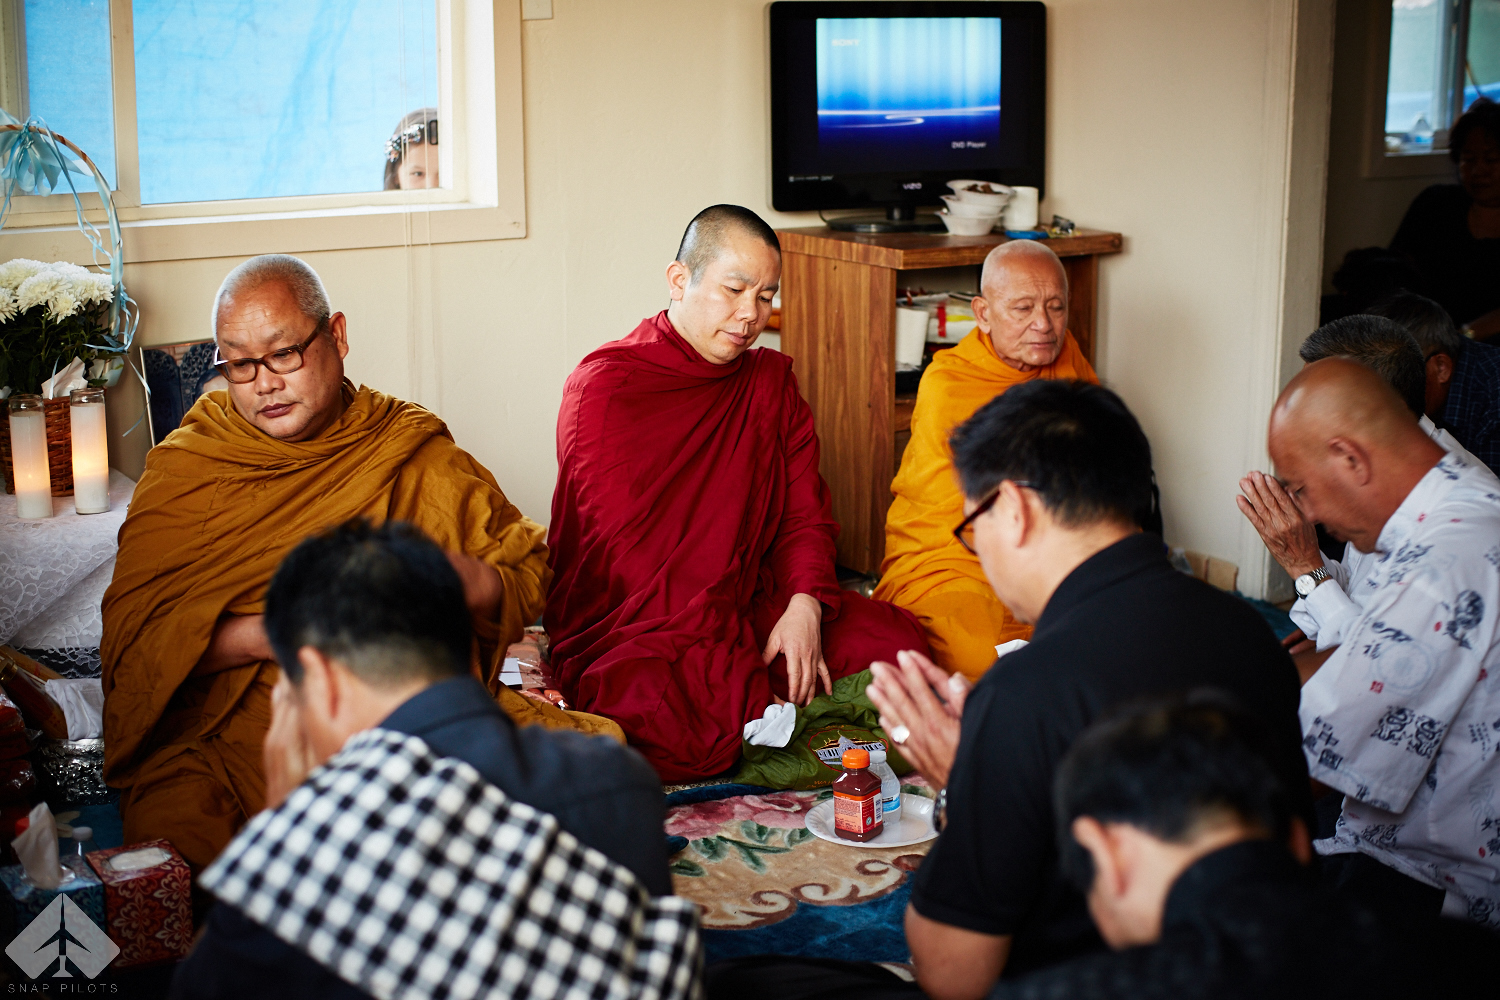  The House was packed with folks. Monks came from all around the states to bless the home along with relatives and close friends. 